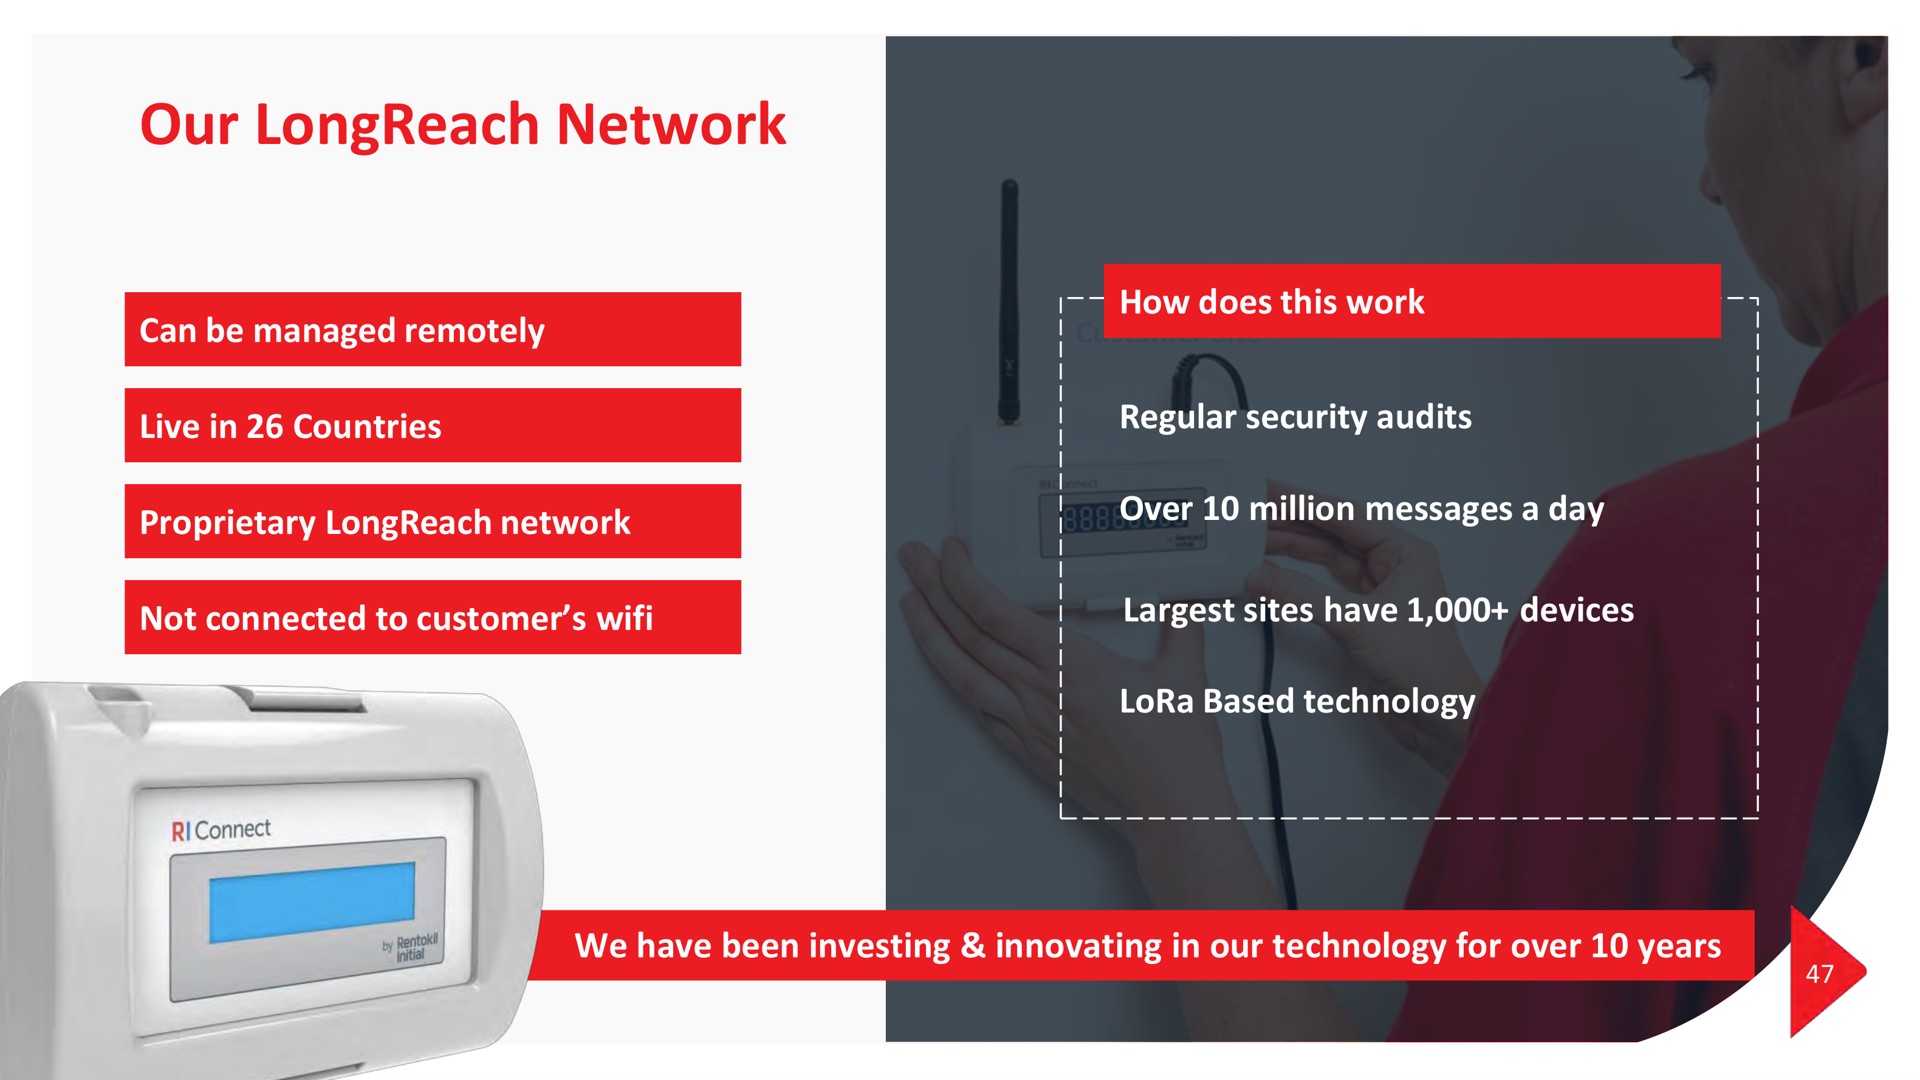 our network can be managed remotely live in countries how does this work regular security audits proprietary network over million messages a day not connected to customer sites have devices lora based technology we have been investing innovating in our technology for over years | Rentokil Initial